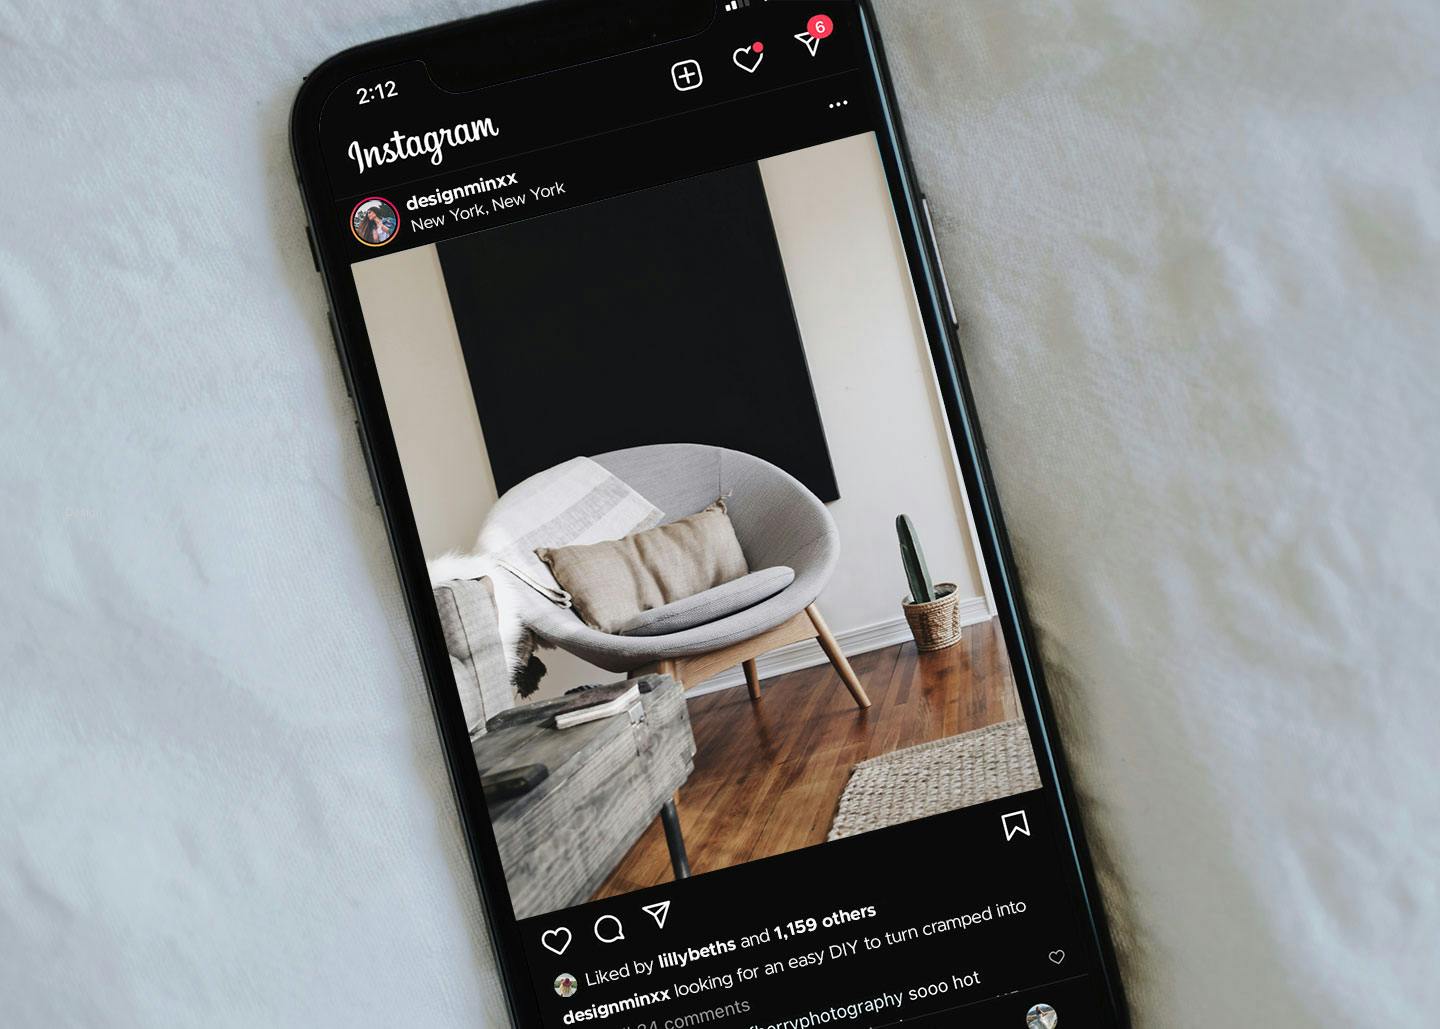 Instagram feed showing an interior design profile